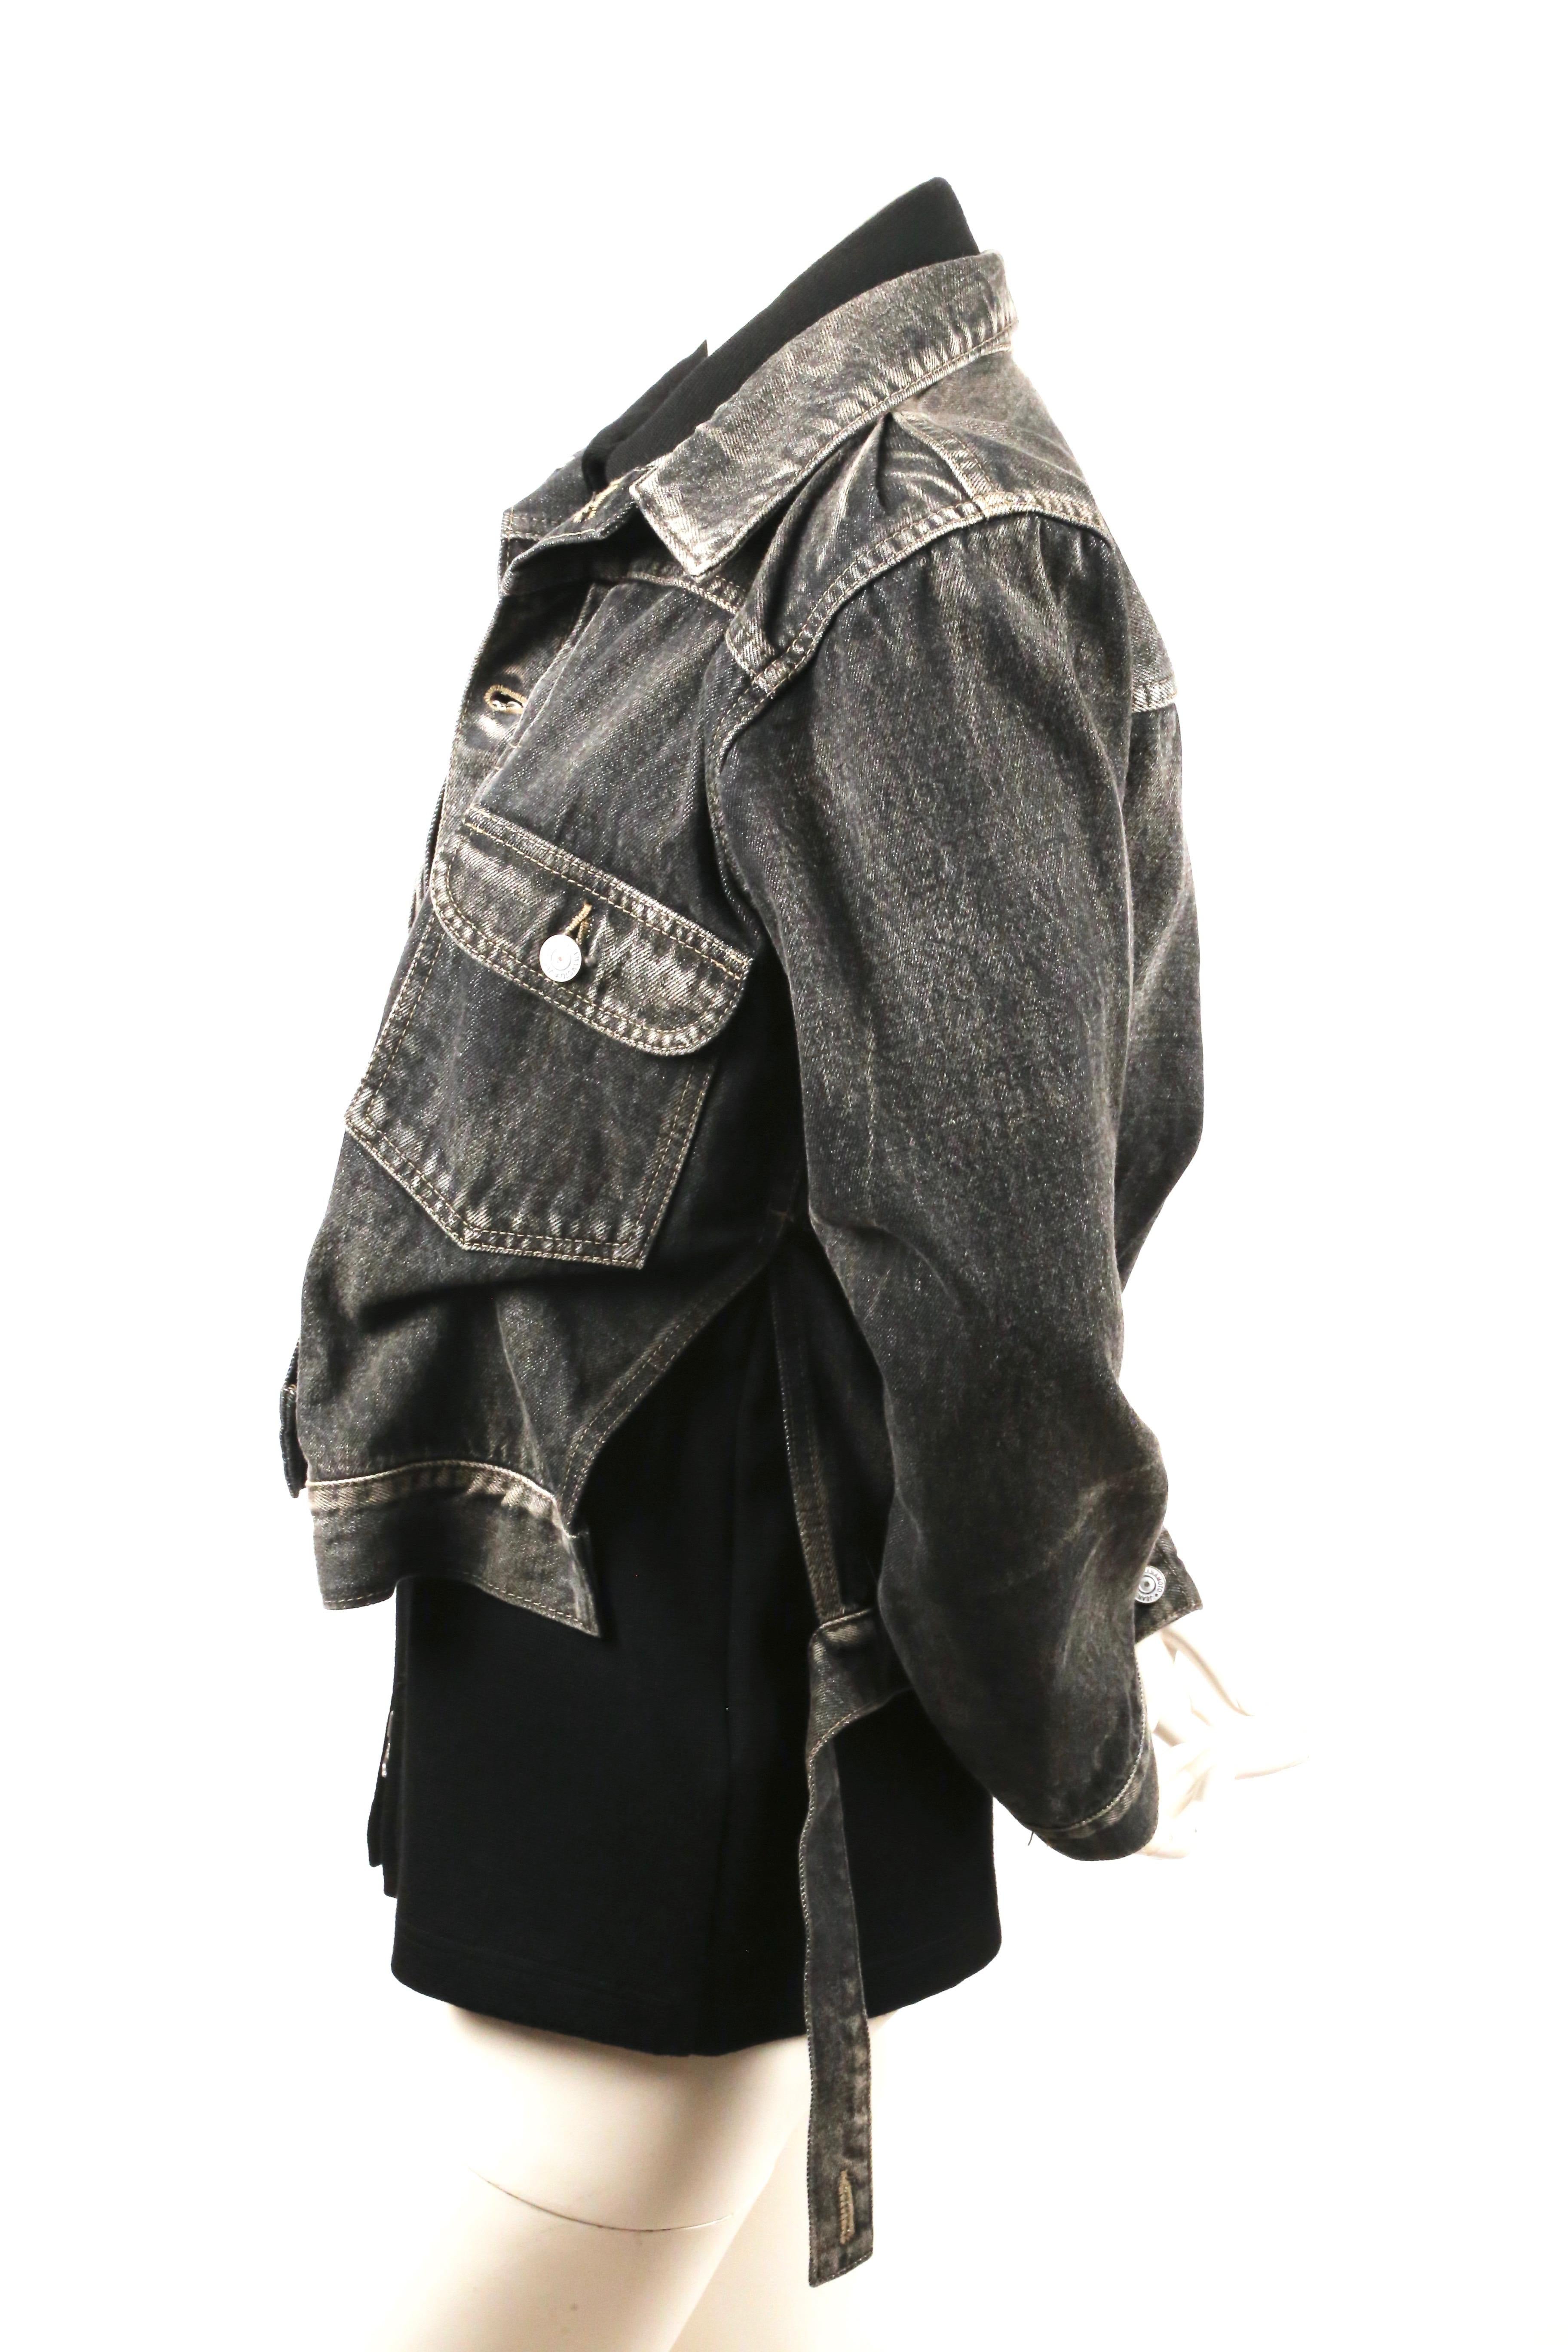 Faded-black, layered, denim jacket from Yohji Yamamoto dating to the fall of 2002 as seen on the runway. Made of dark grey/faded black distressed cotton denim. Under layer of jacket is a black cotton knit and zips up center front with a silver-toned